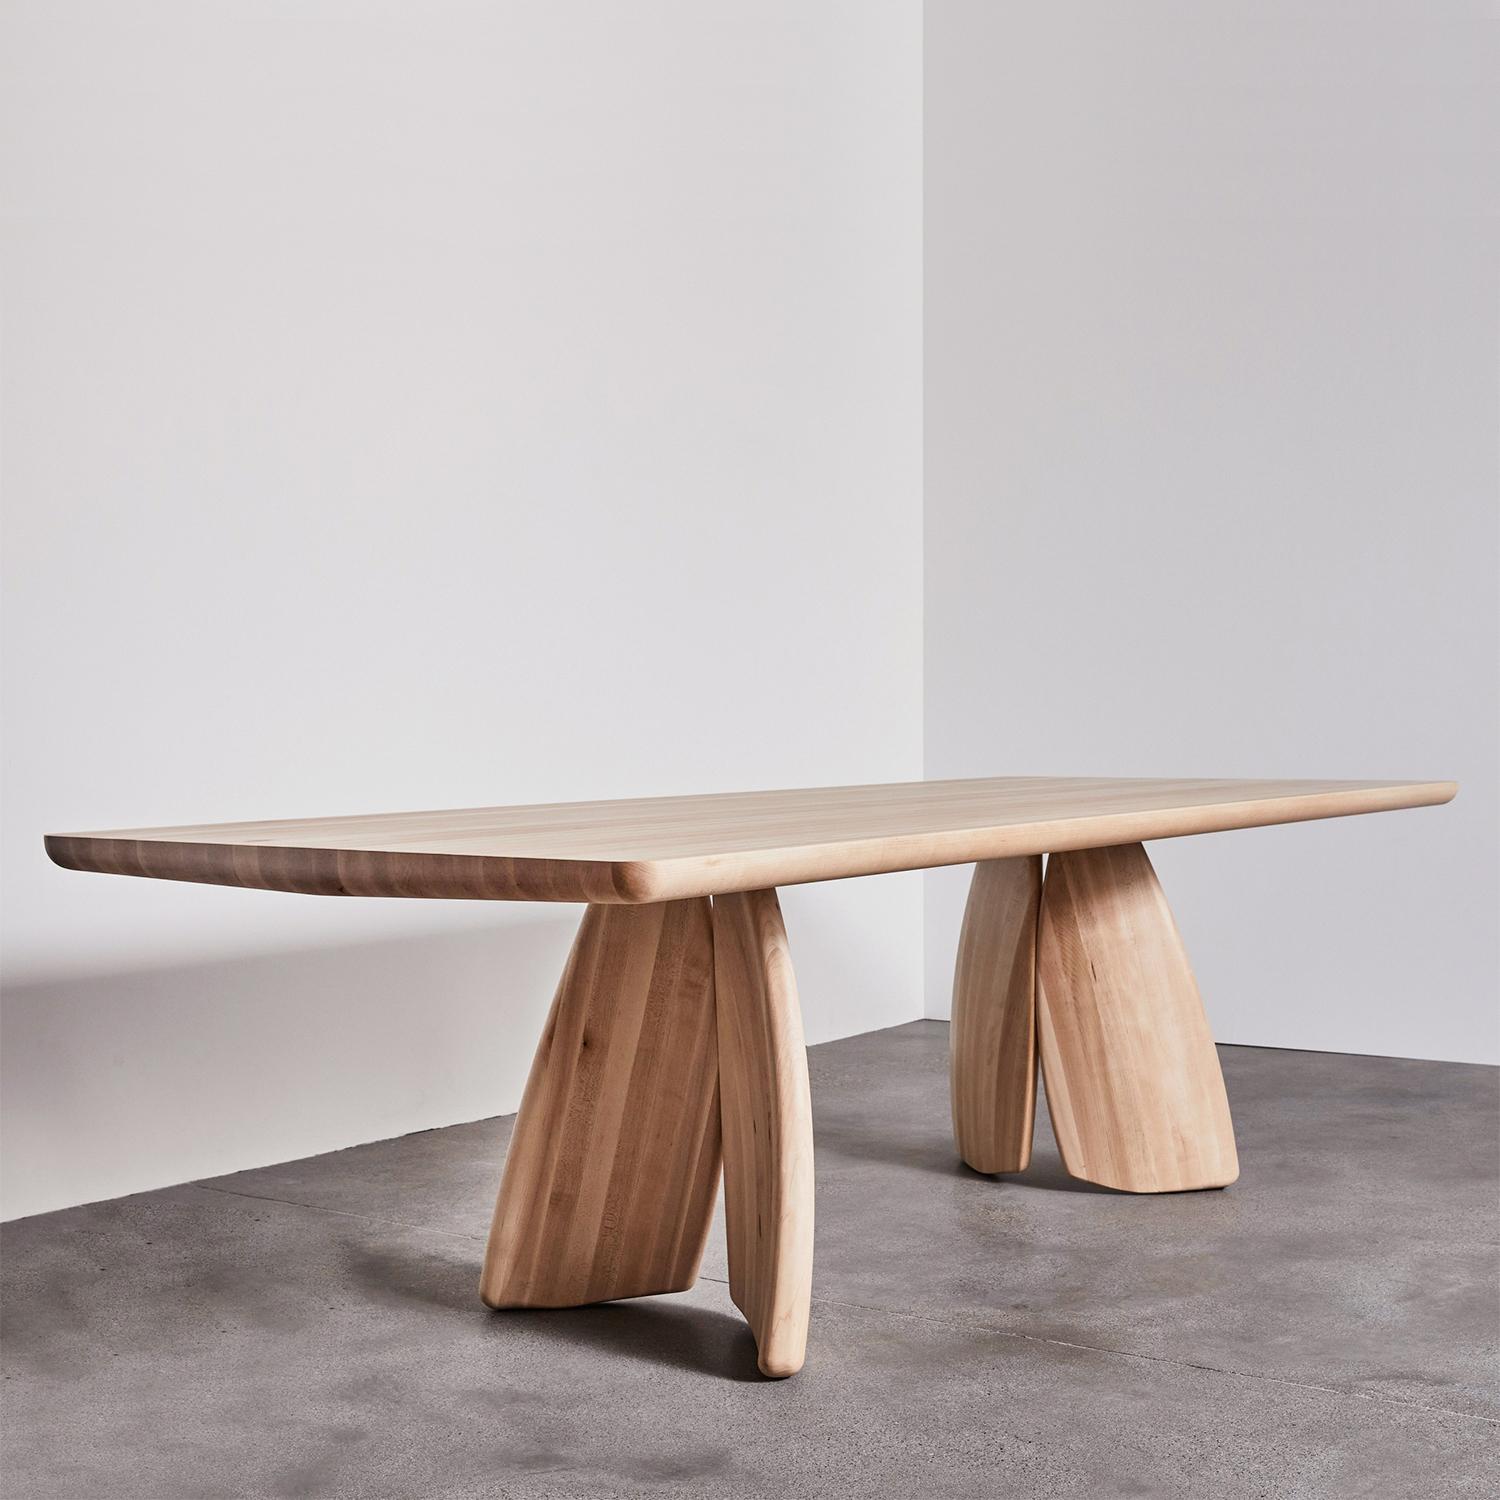 Dining table Cove Oak with all structure in solid oak, 
with curvy base shape and top in glued lists with rounded sides.
Also available in solid walnut wood, on request.
Also available in:
L200xD100xH75cm, price: 11900,00€
L220xD100xH75cm,